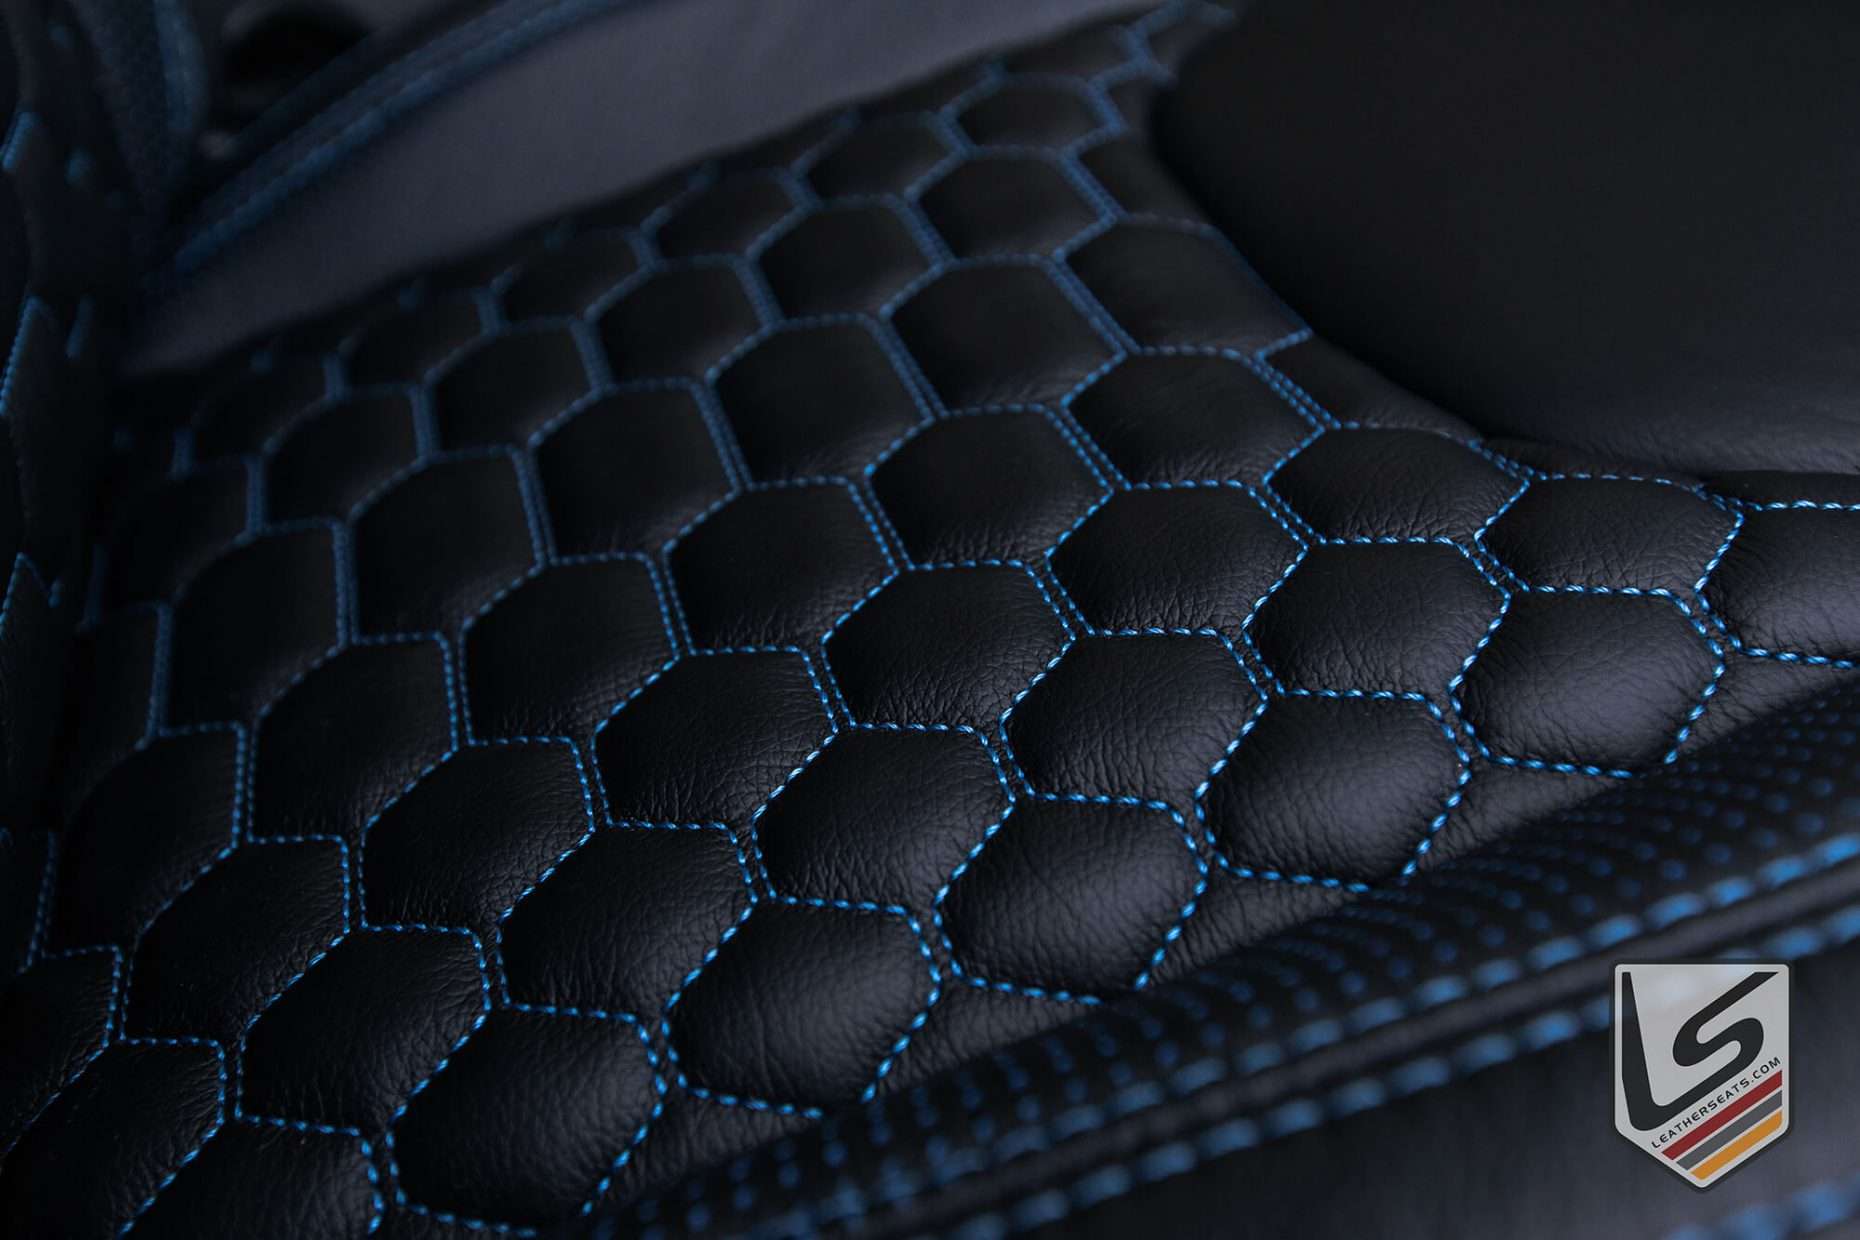 Close up of quilted Wrangler seat cushion with cobalt stitching